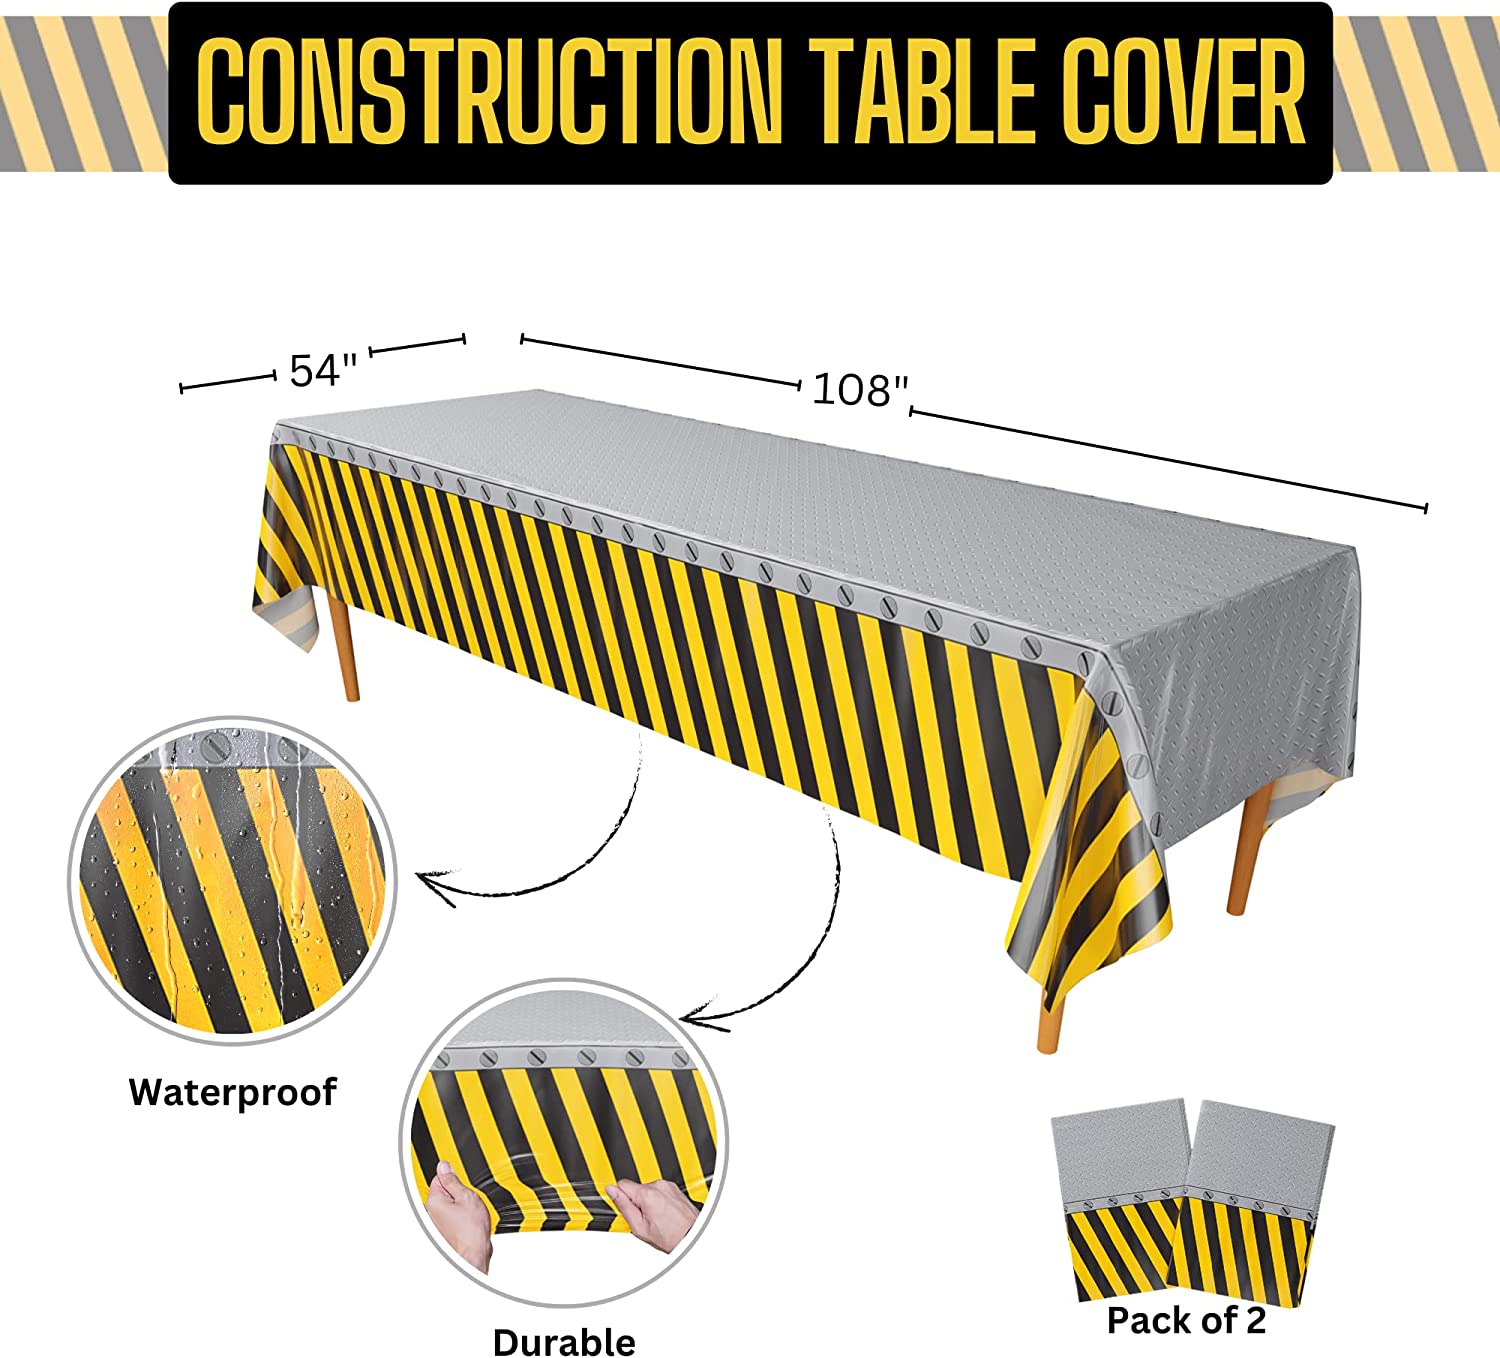 Waterproof and Durable Construction Table Cover